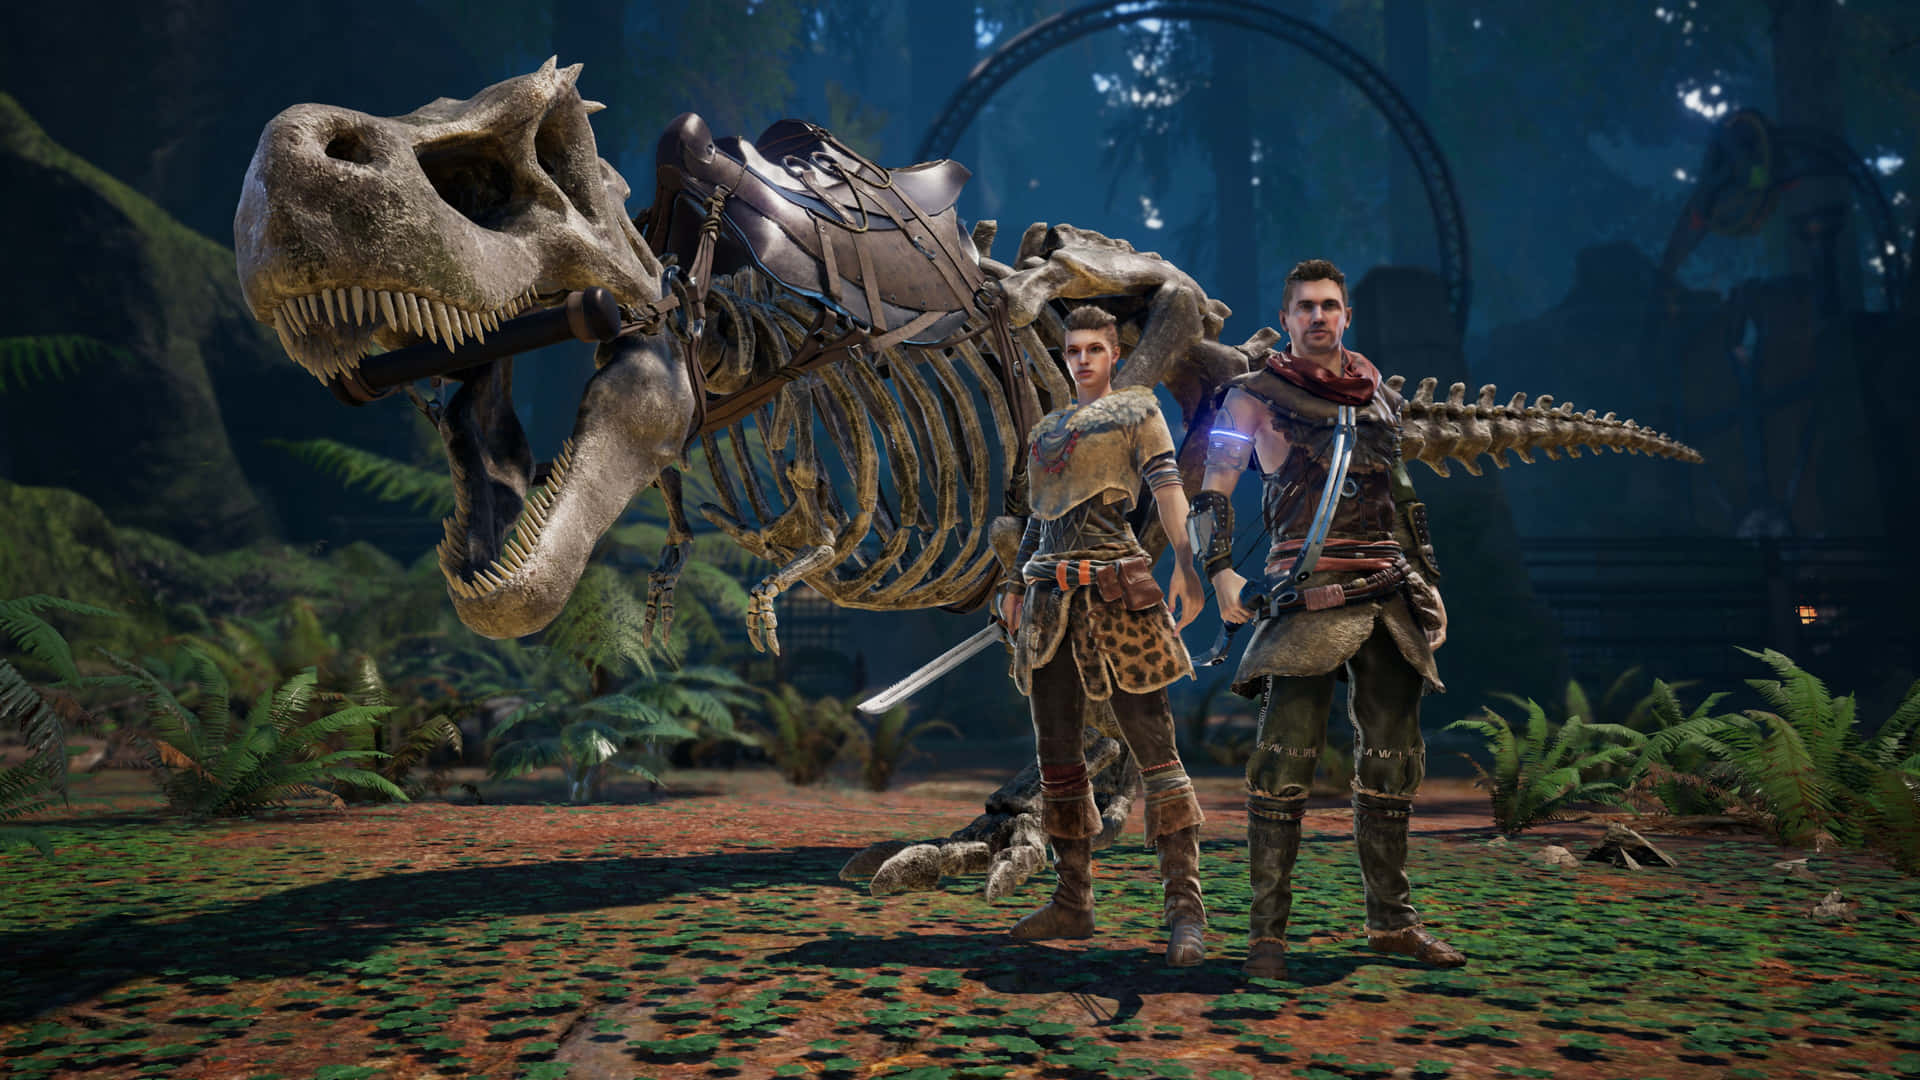 A Woman And A Man Standing In Front Of A Dinosaur Skeleton Background